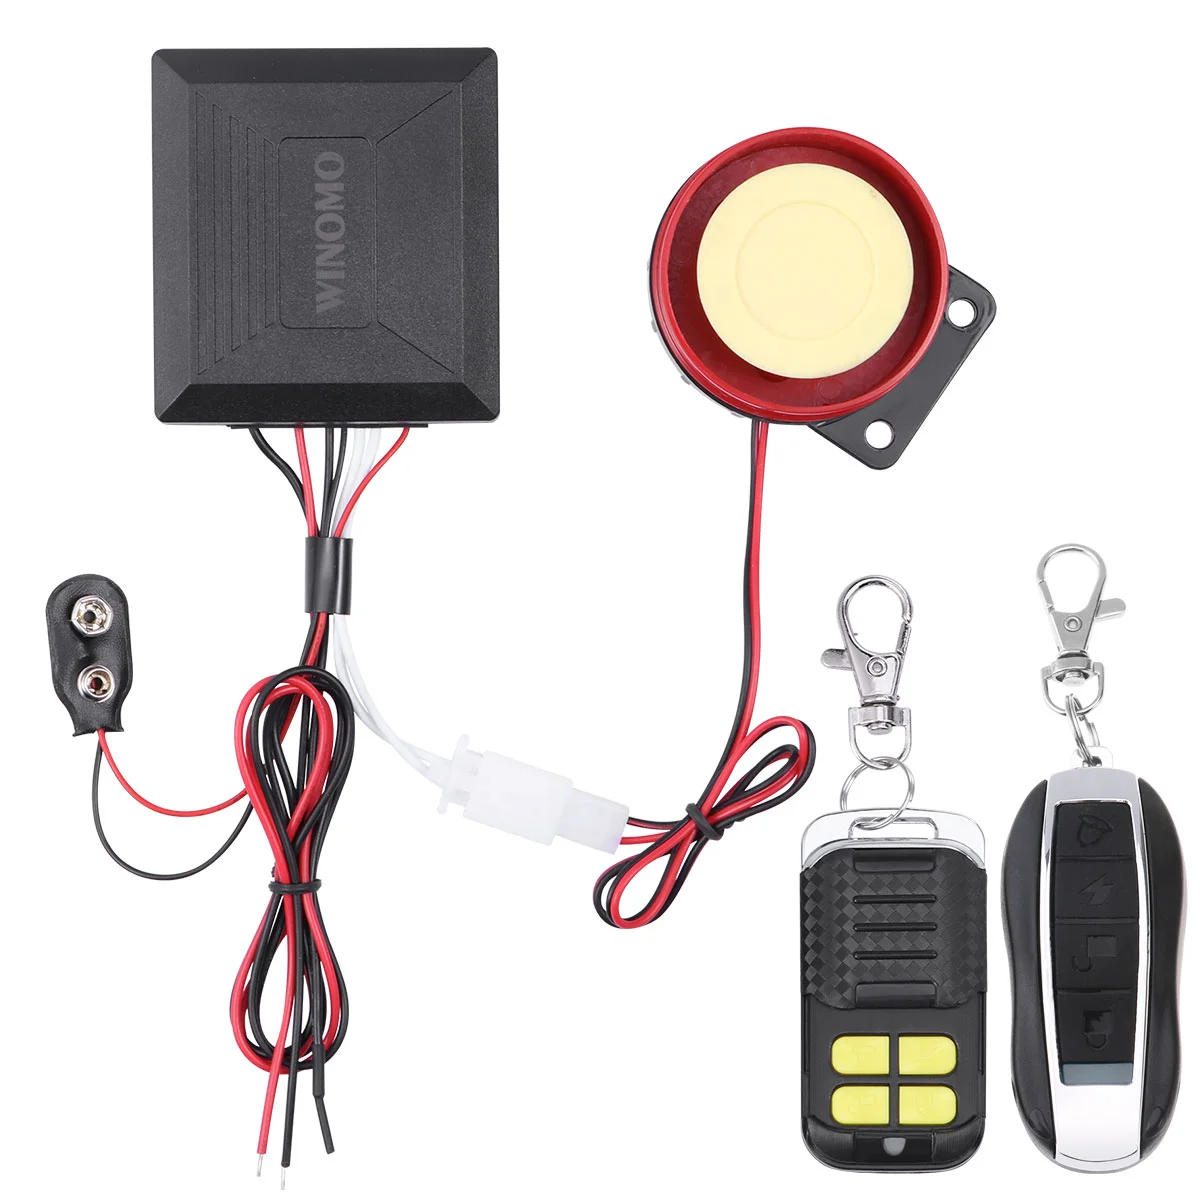 WINOMO 12v Universal Motorcycle Motorbike Scooter Anti Theft Security Alarm System with Double